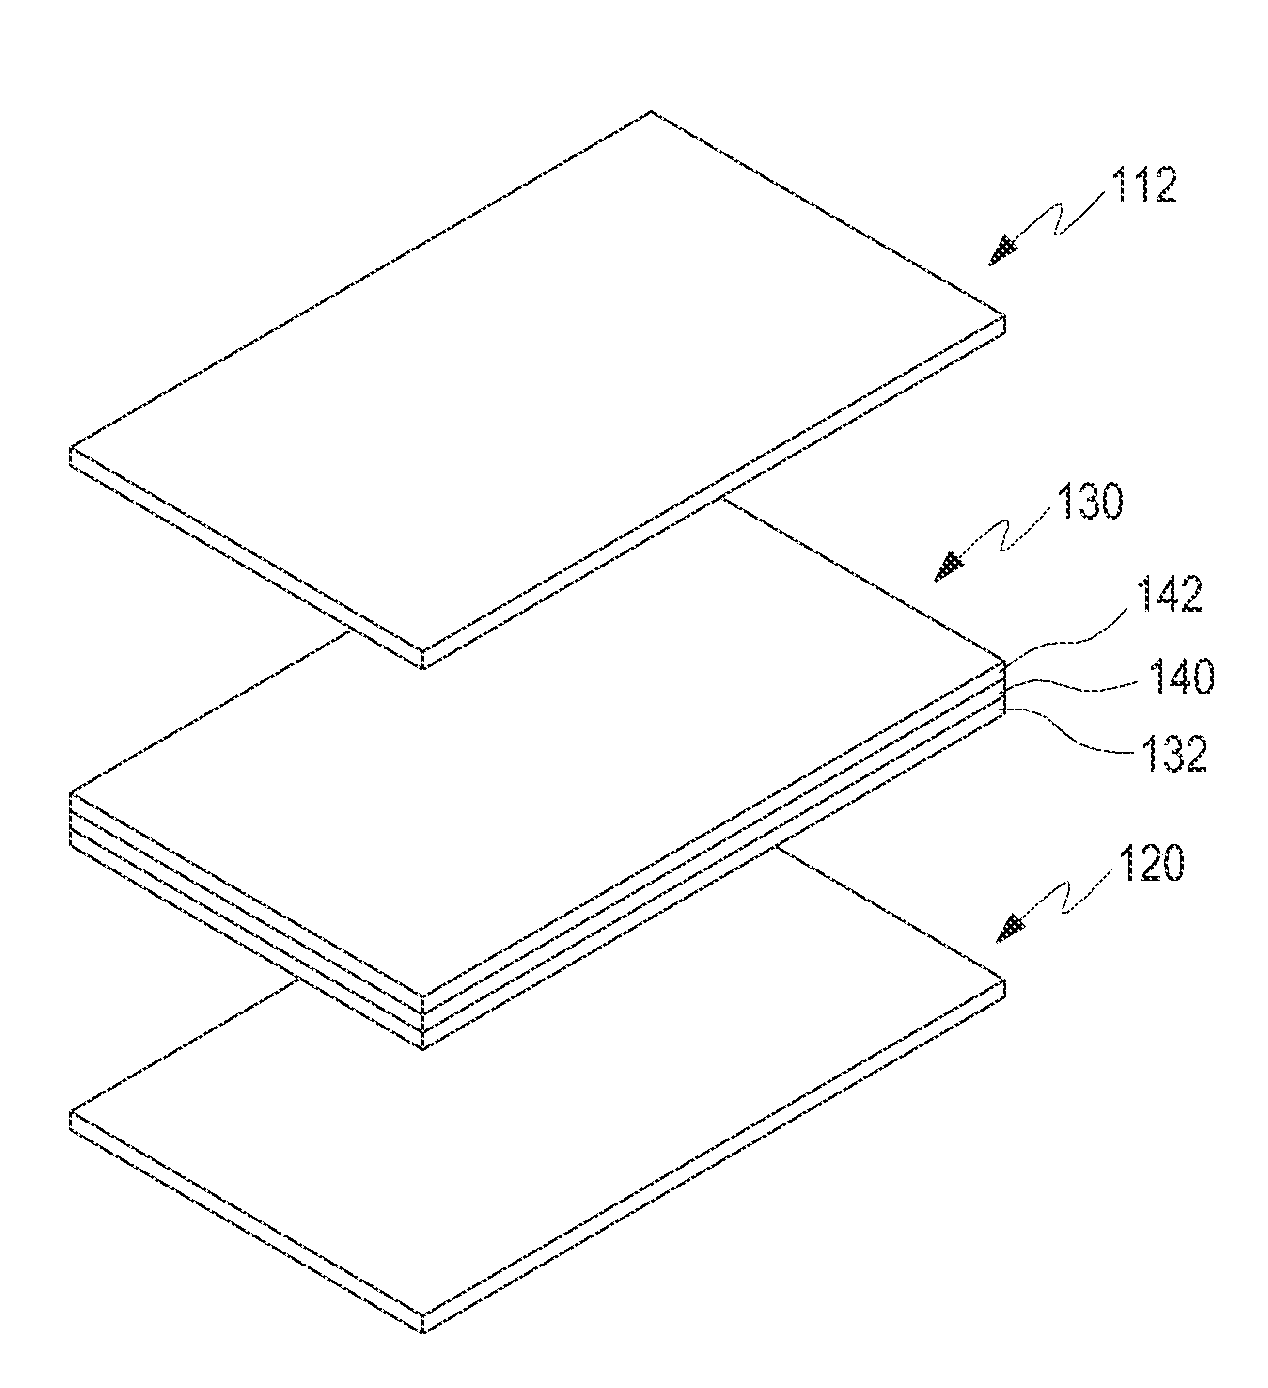 Apparatus and method for improving input position and pressure detection in a pressure detection touch screen